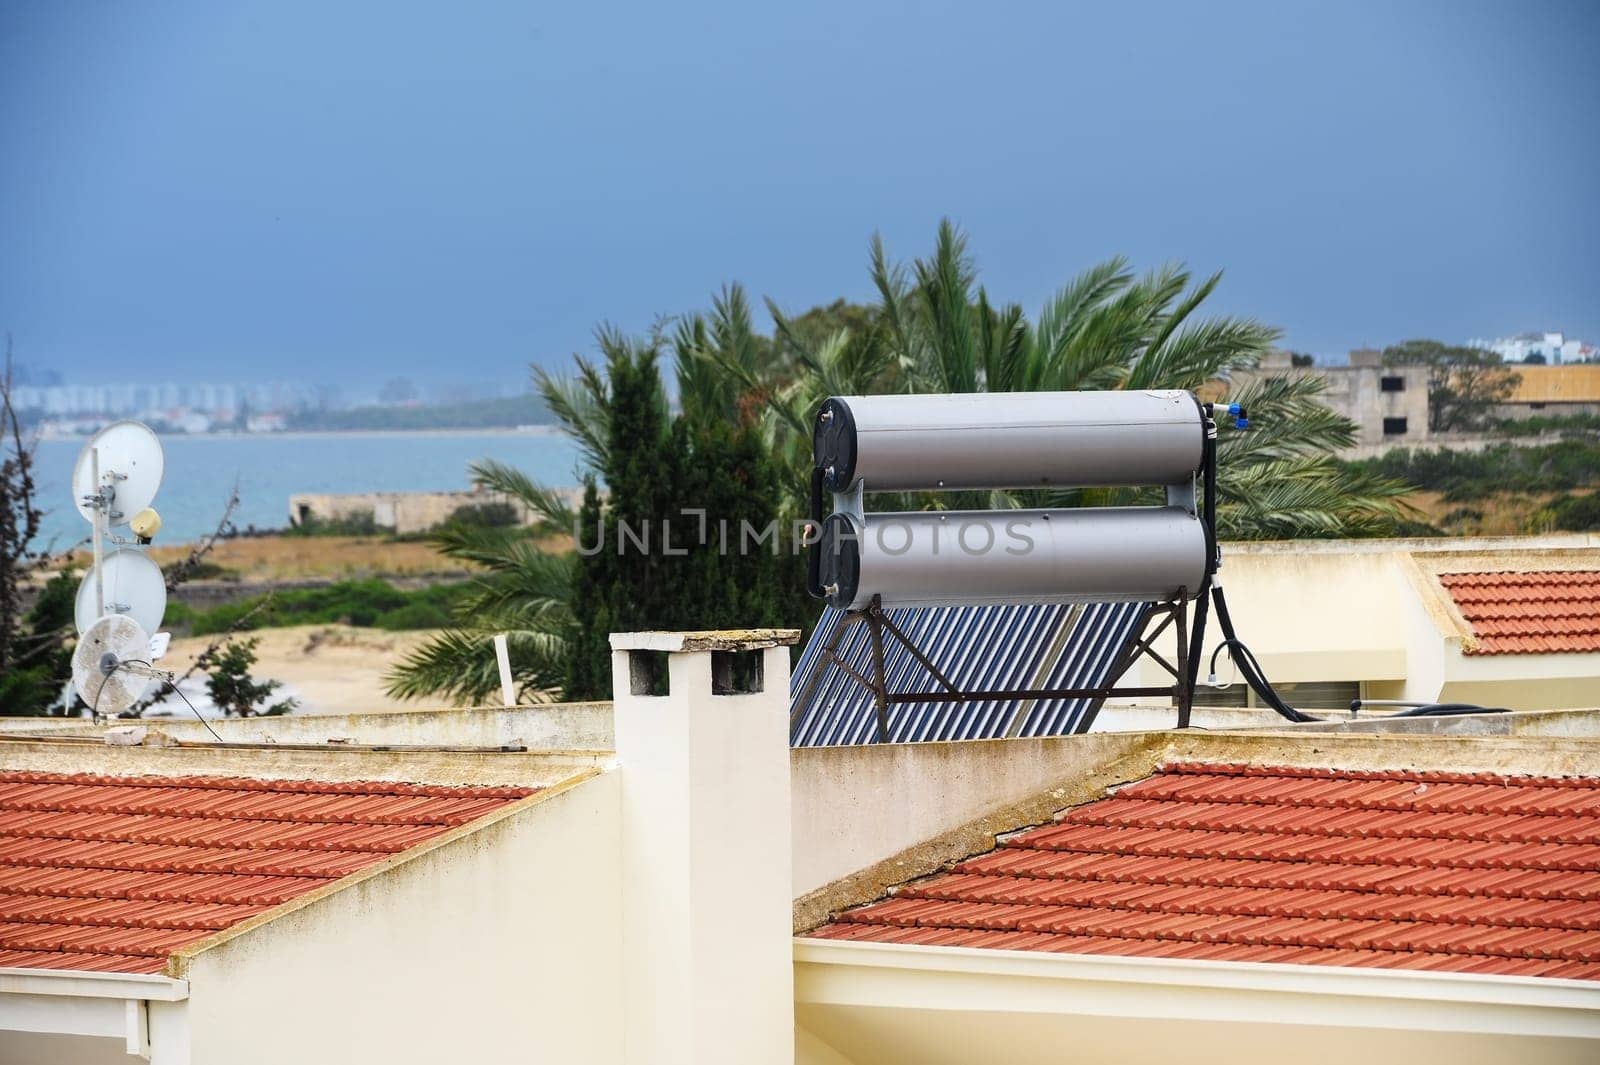 Solar boilers for water heating on the roofs of houses. Solar heated water.